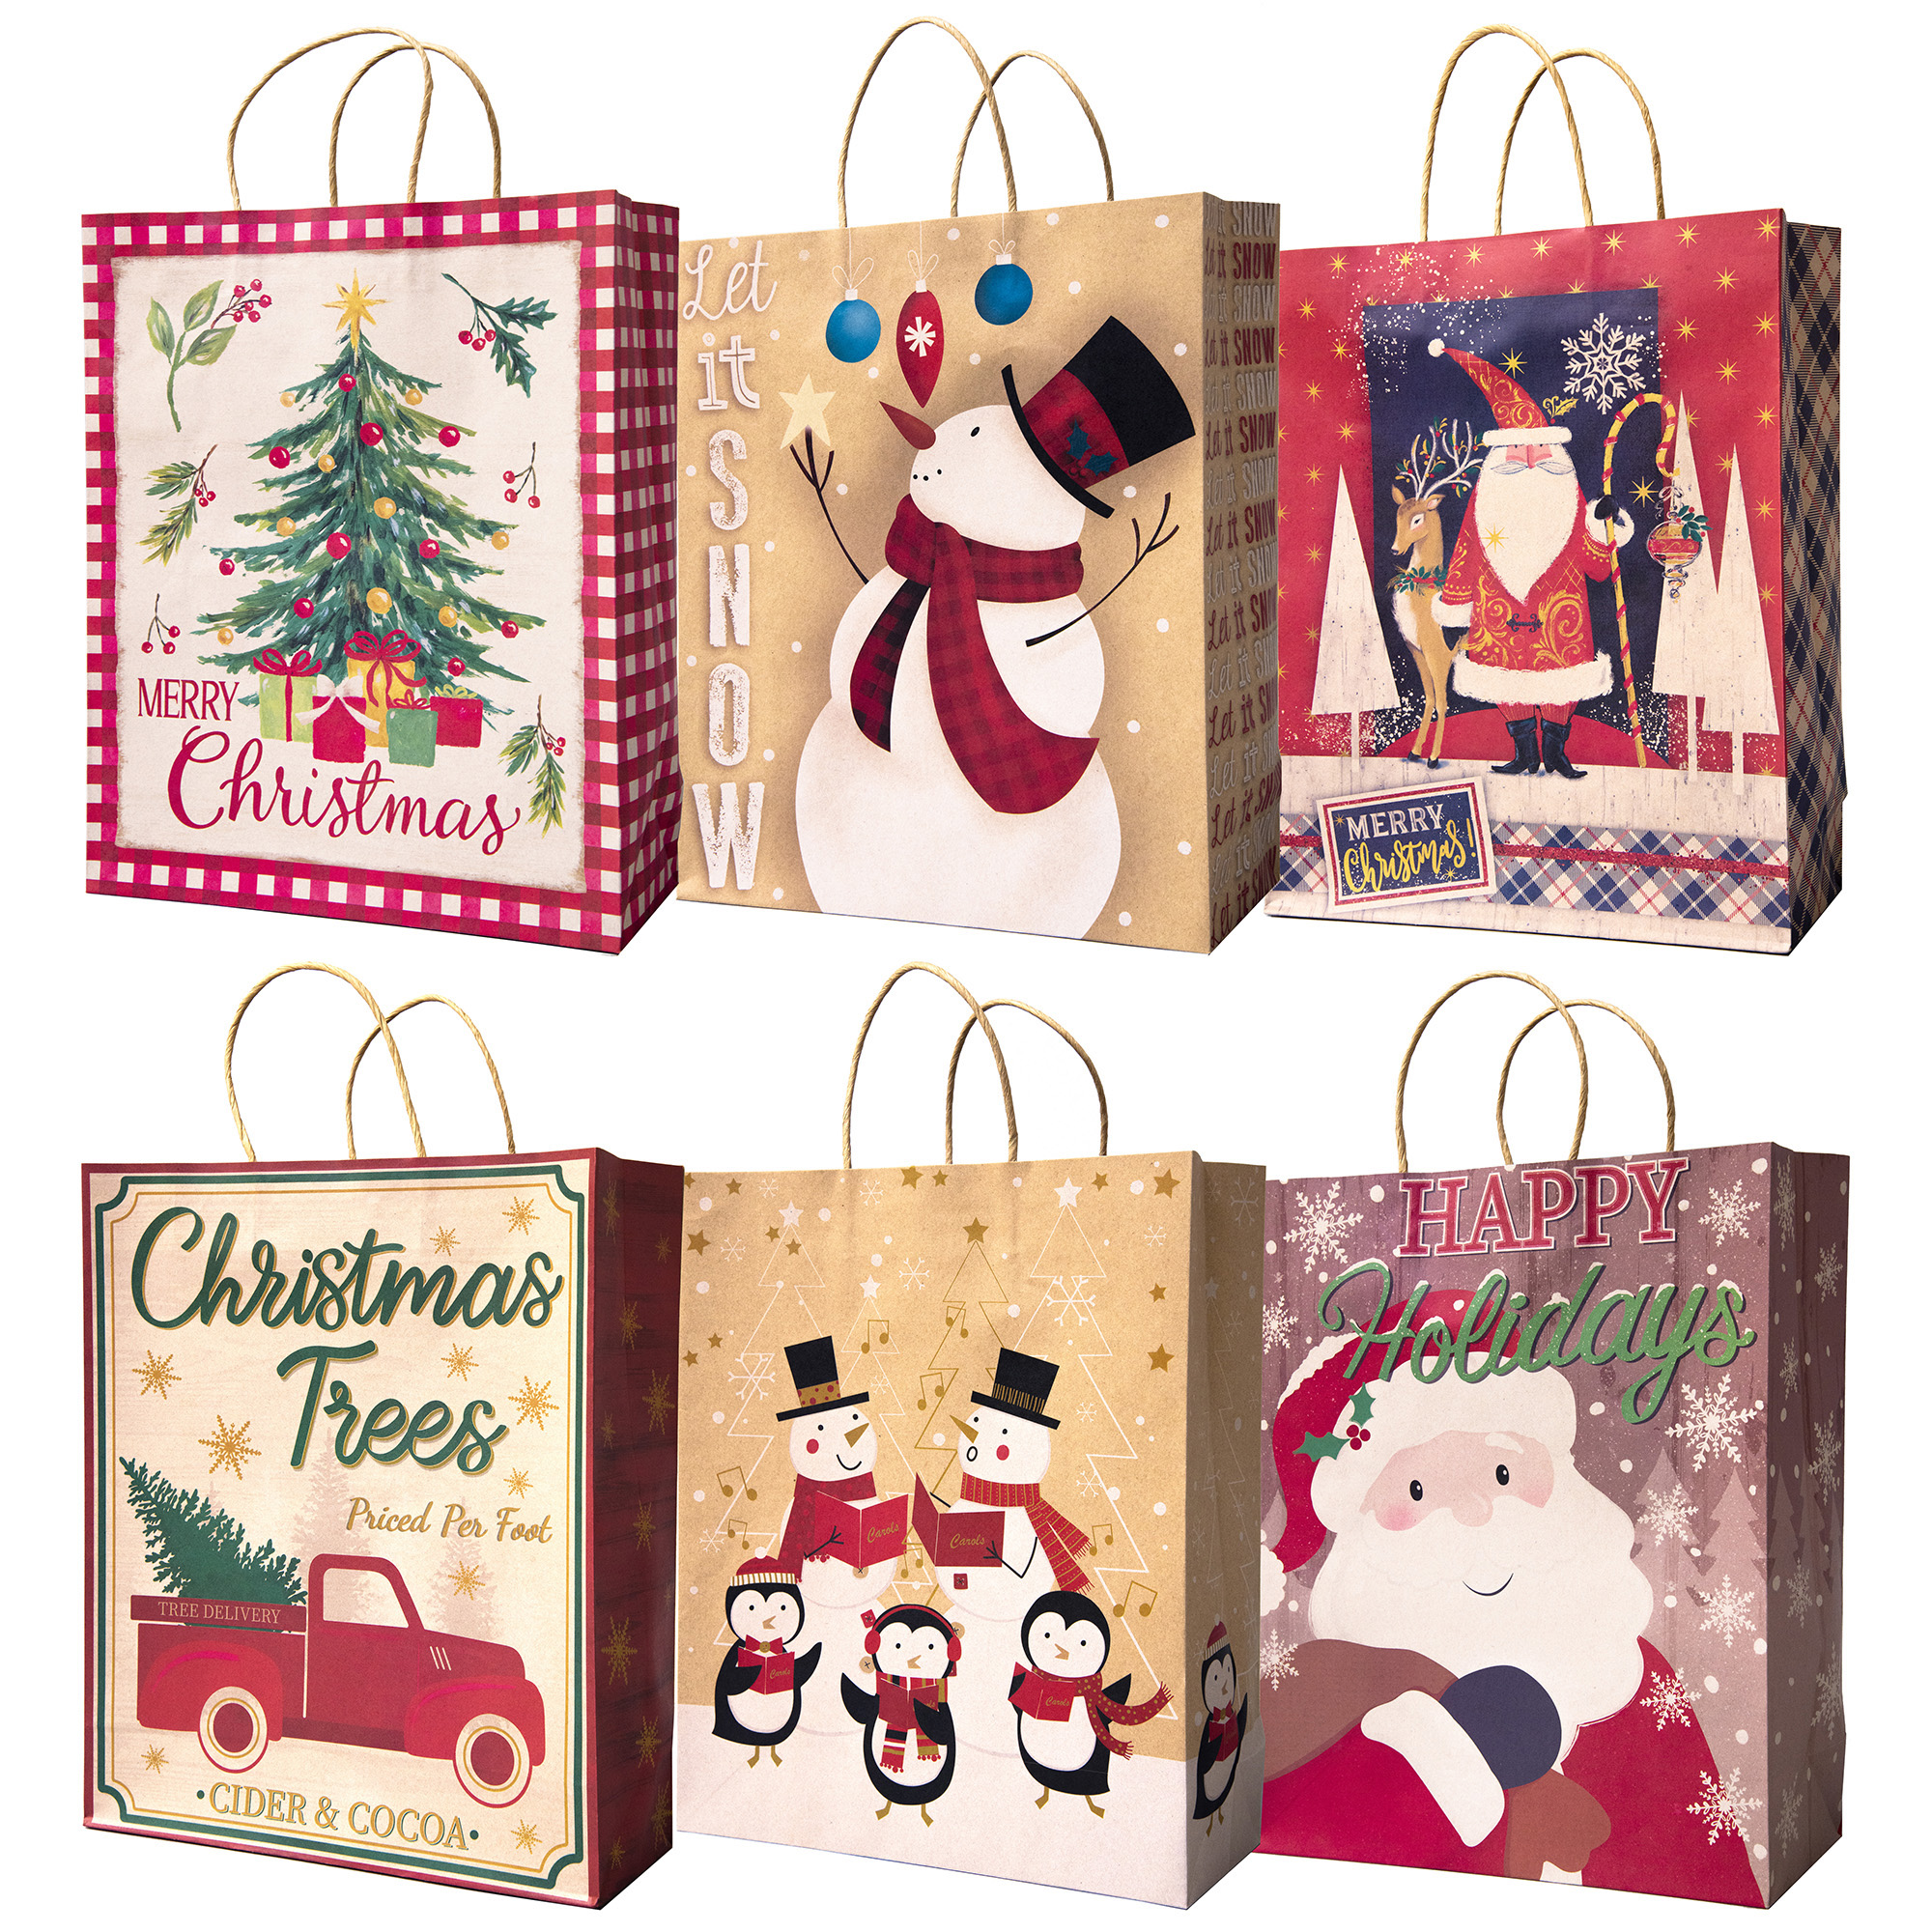 Lindy Bowman Pack of 12 Assorted Large Christmas Gift Bags with Handle